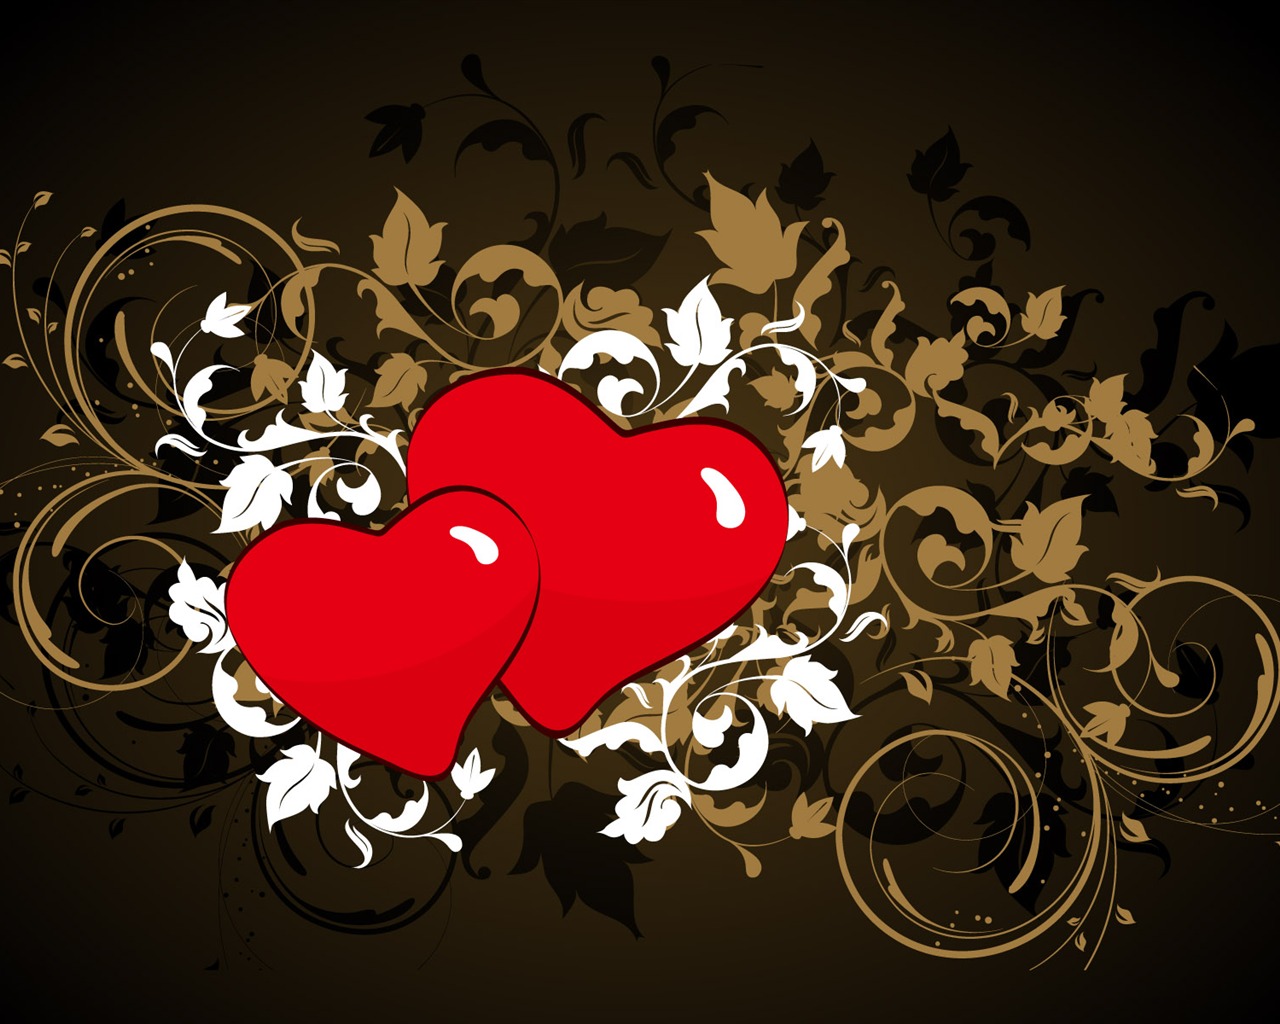 Valentine's Day Love Theme Wallpapers #5 - 1280x1024